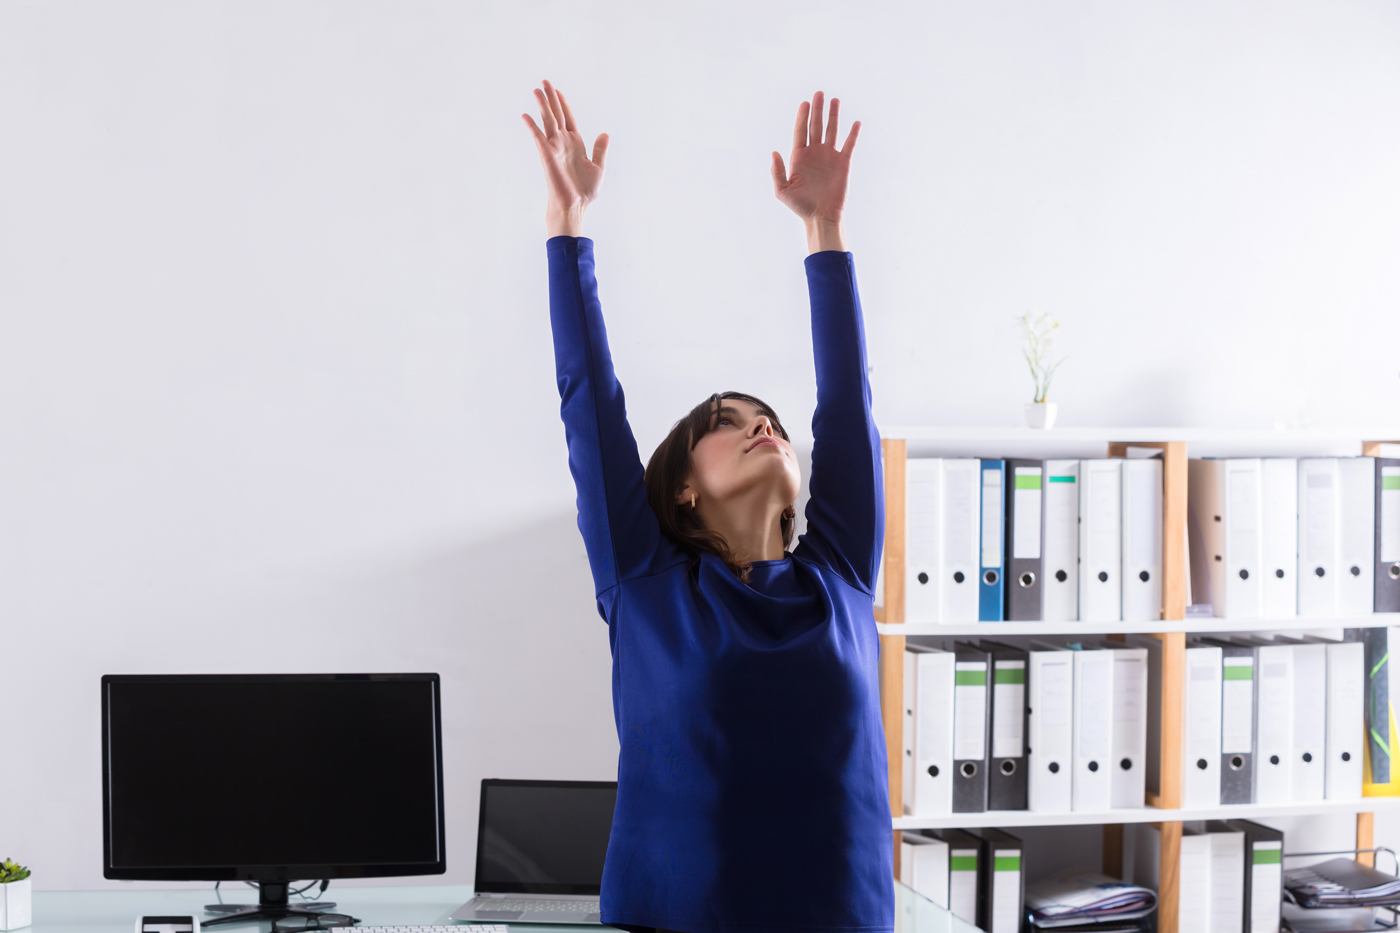 Watch out, tread desk: These in-office ab moves are coming for your spotlight